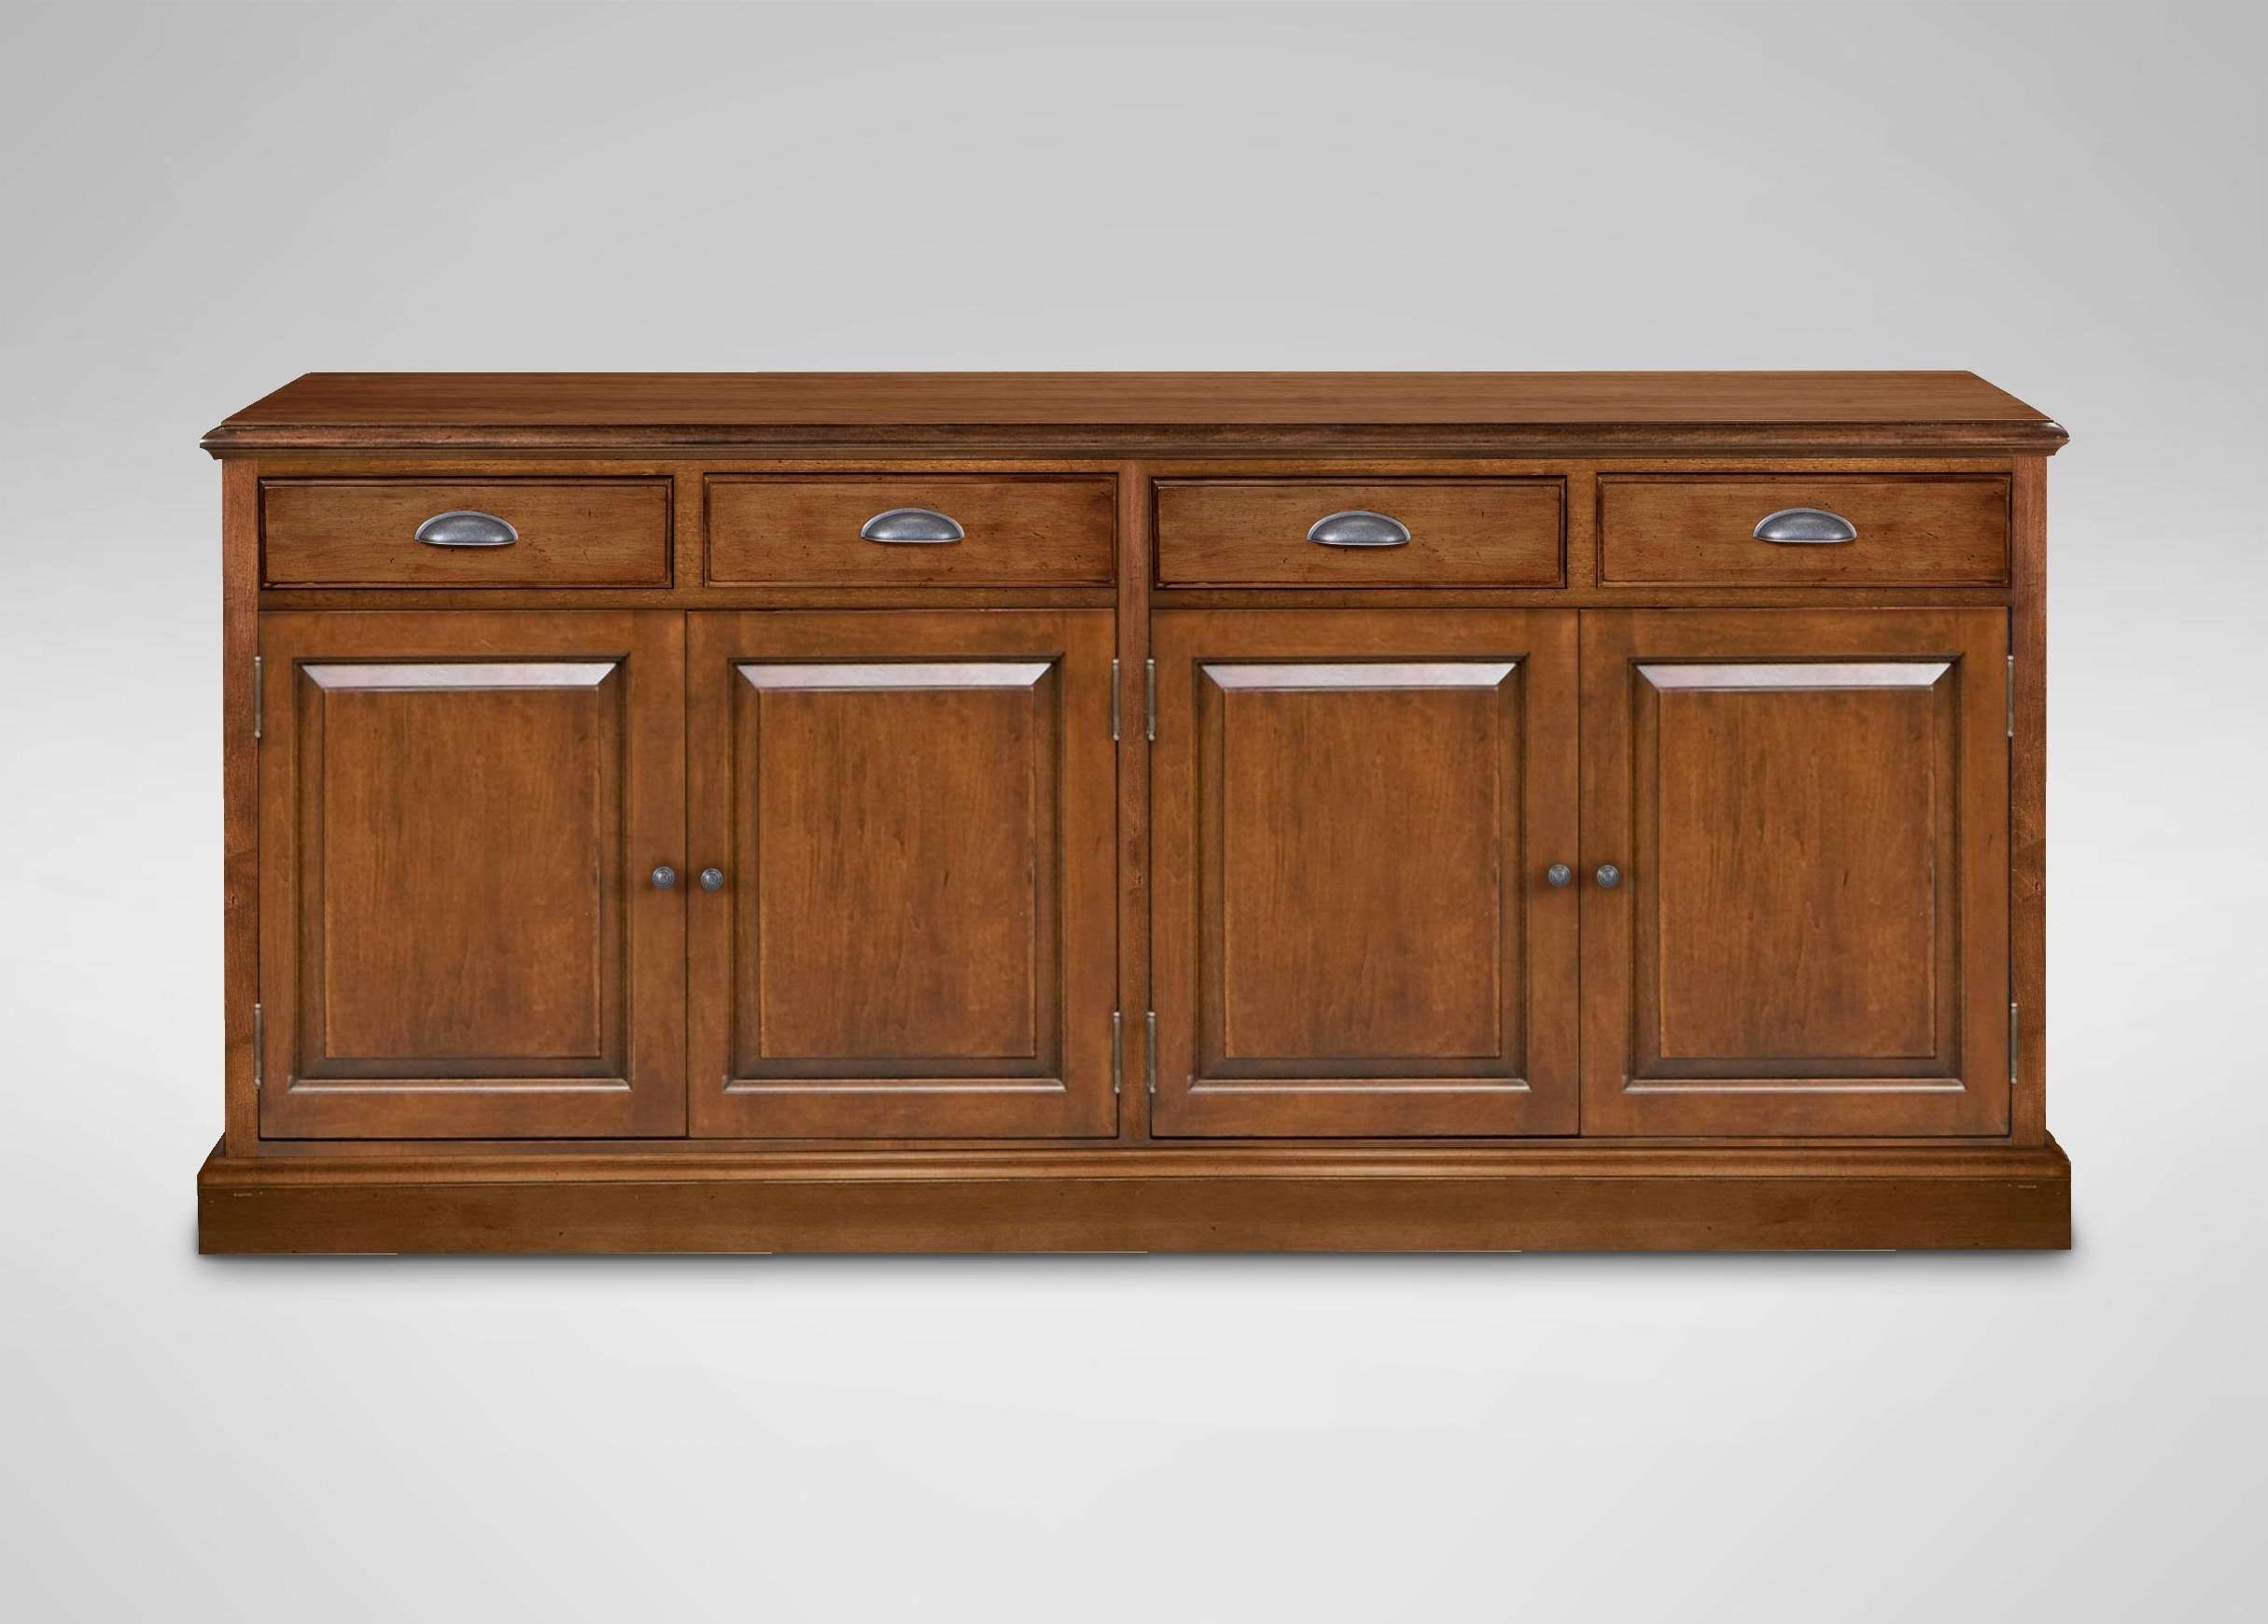 Shop Buffet Storage, Sideboards & Servers | Ethan Allen Pertaining To Sideboards And Servers (View 2 of 20)